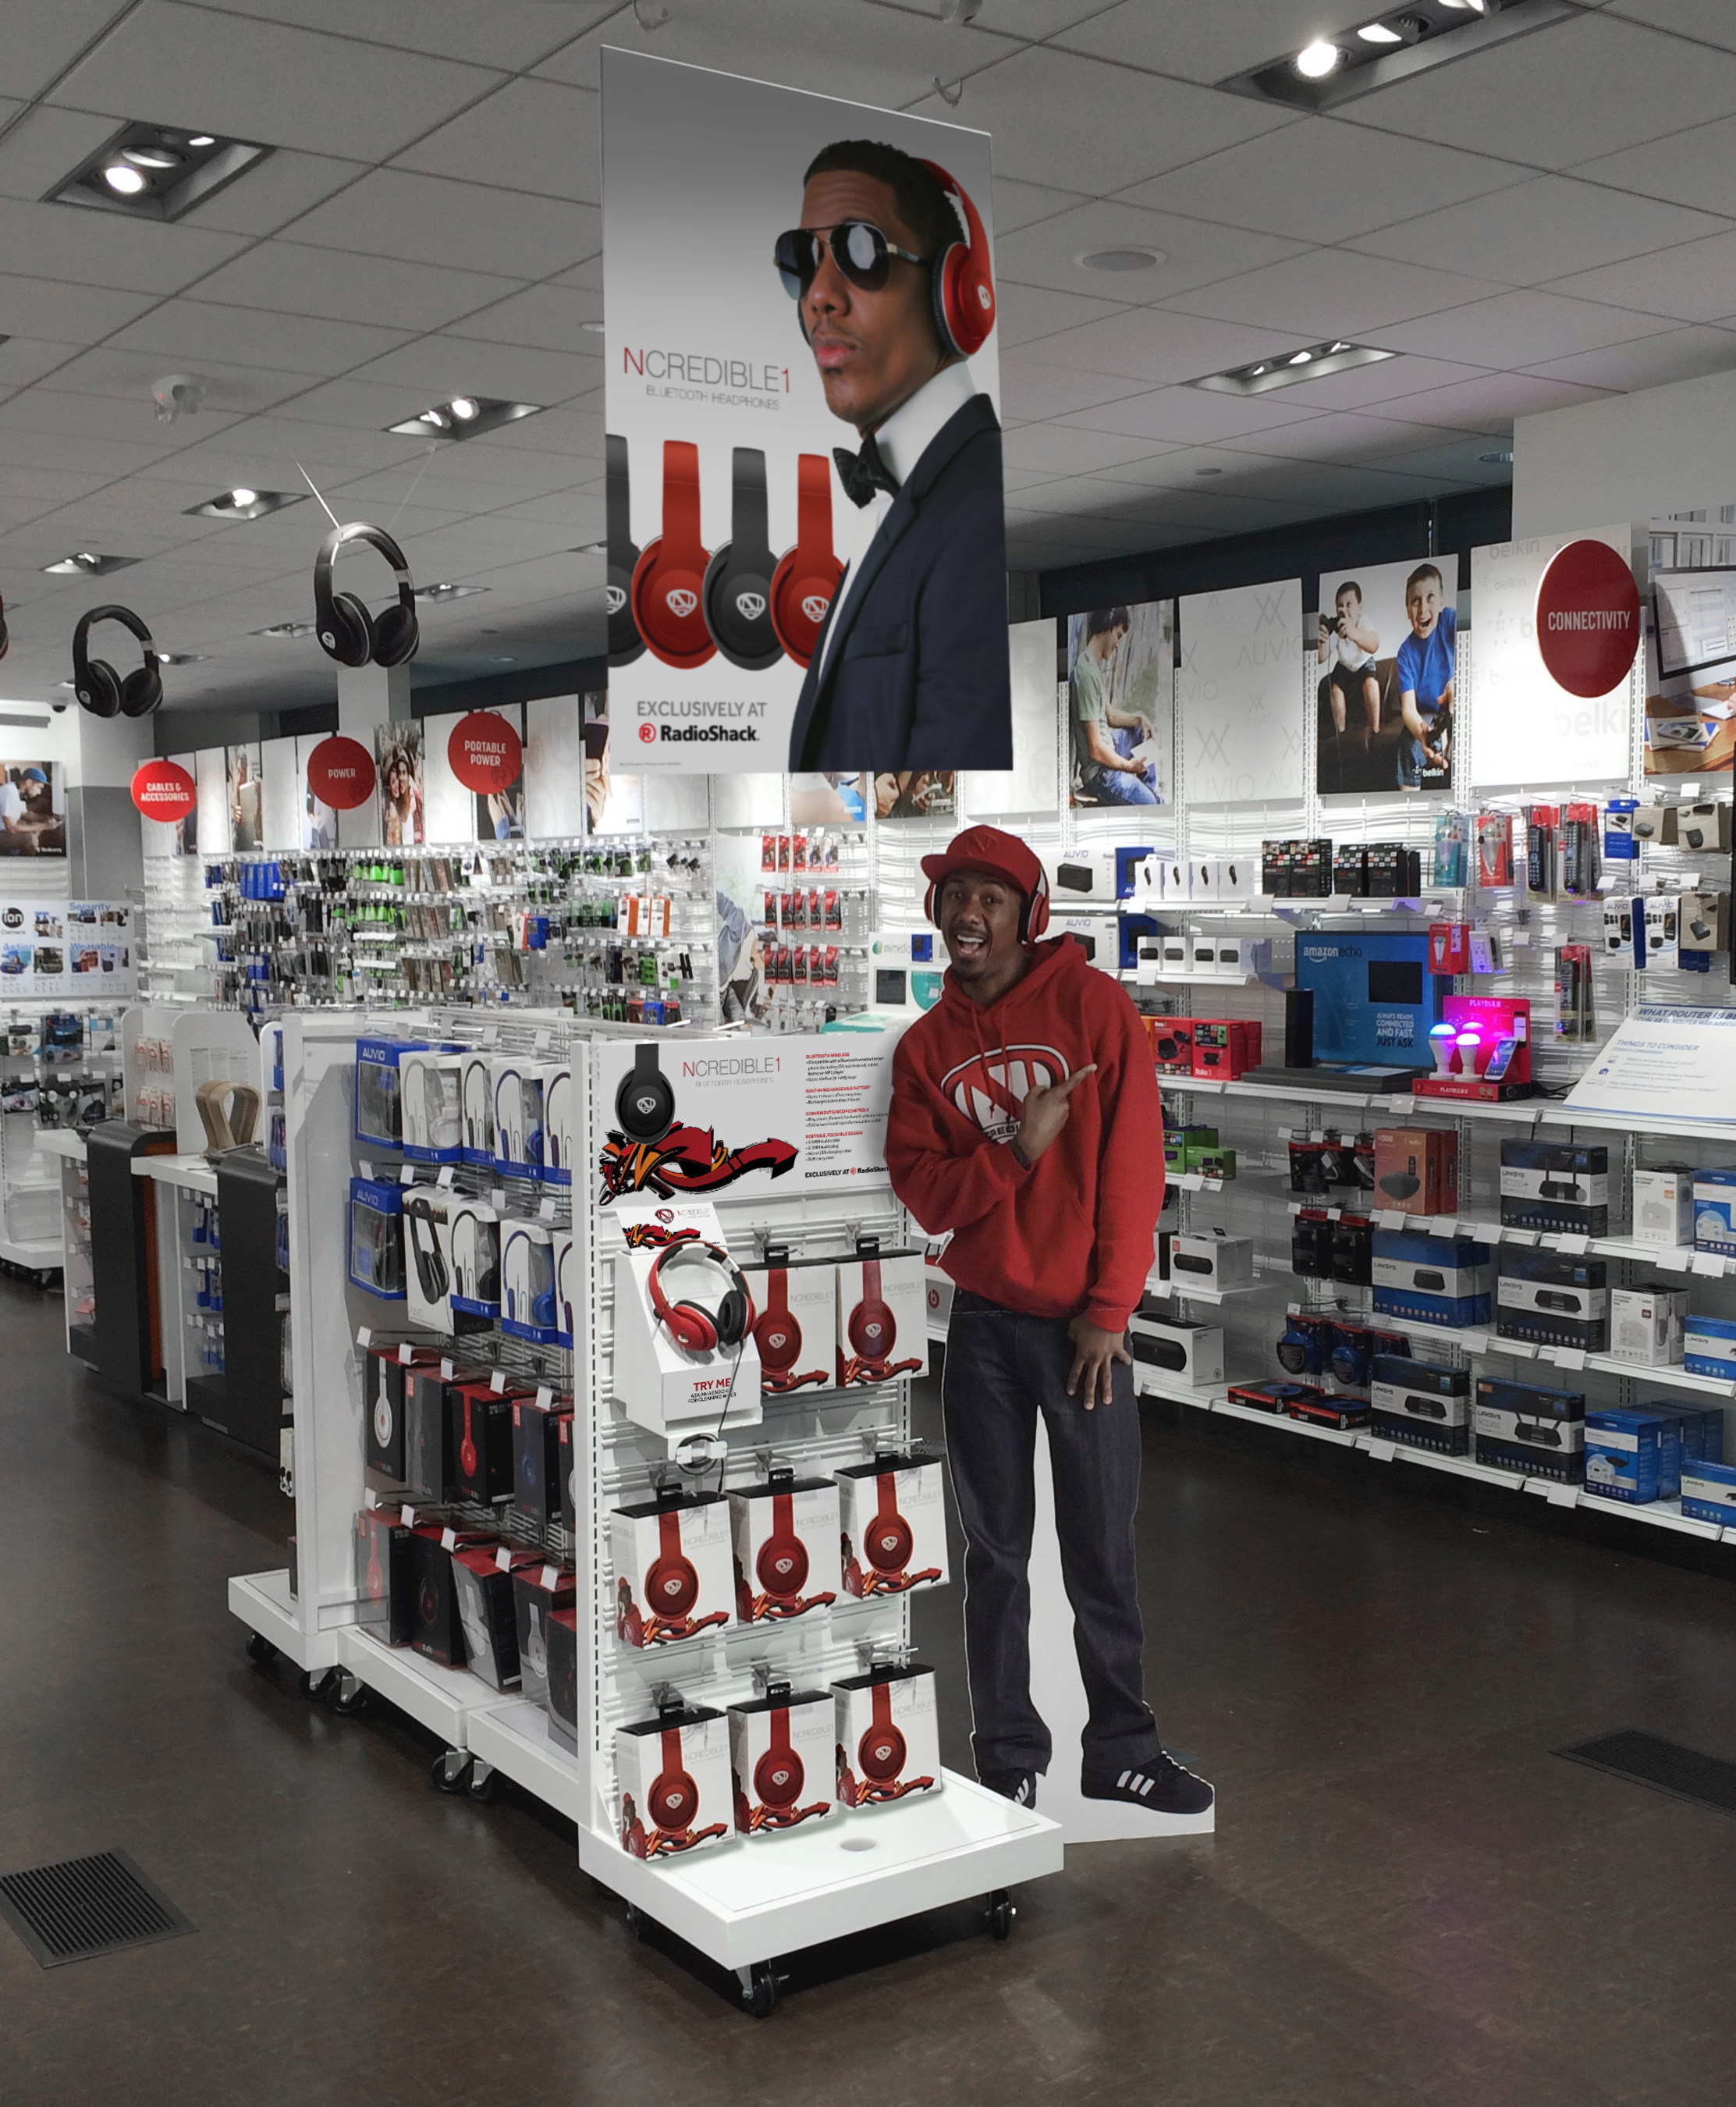 RadioShack and Chief Creative Officer Nick Cannon Launch NCREDIBLE product line